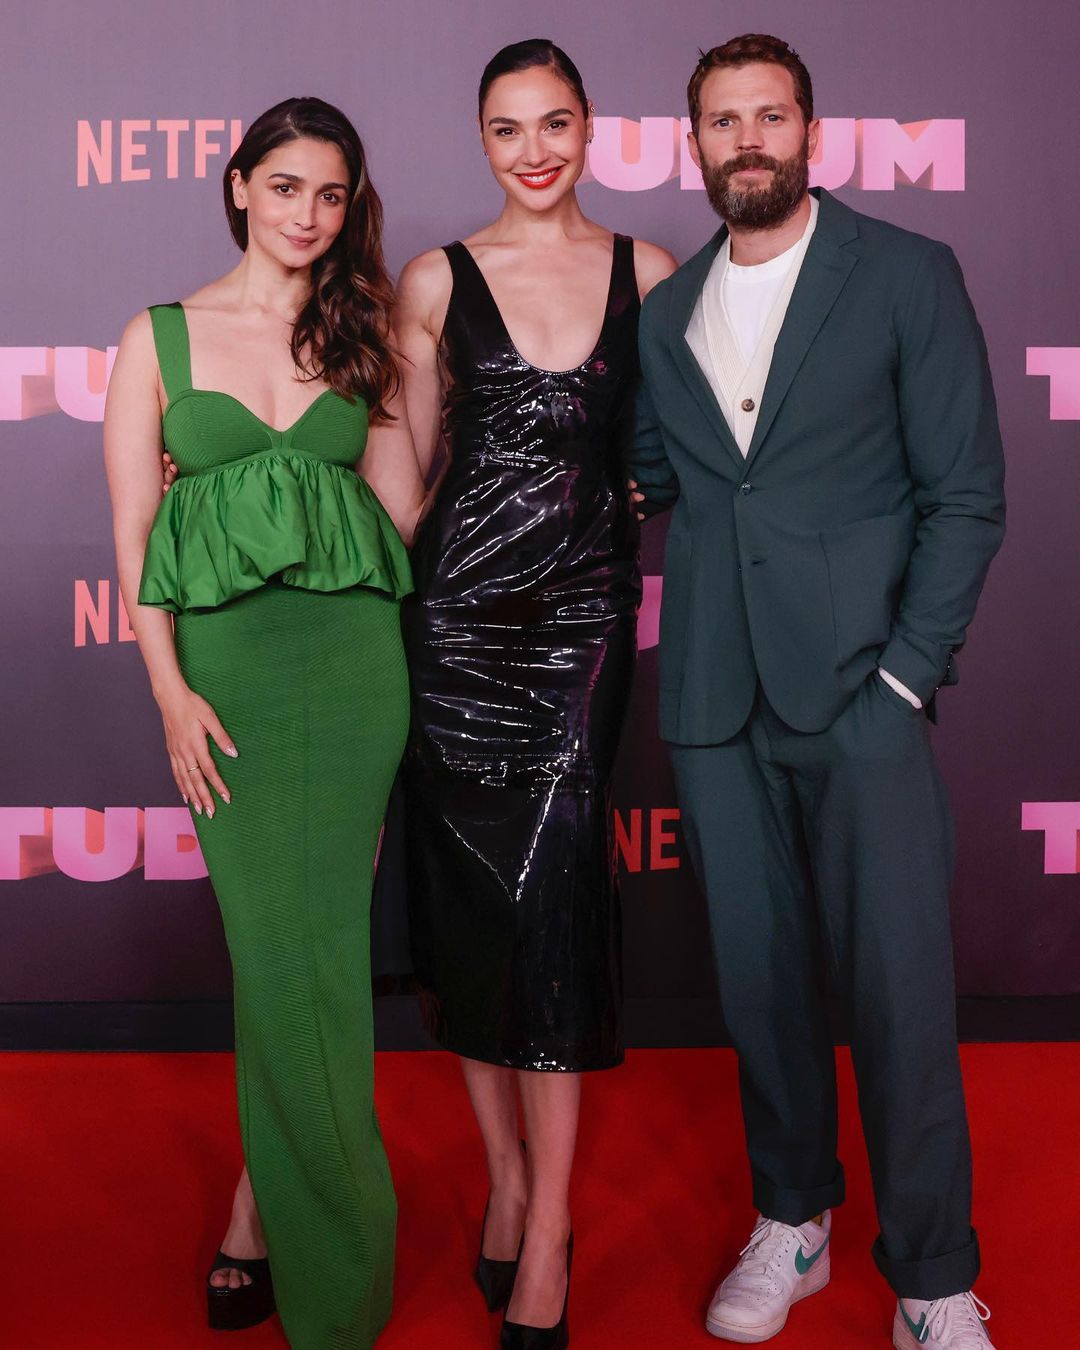 Check Out Ali Bhatt's Fashion Flex During Her "Heart Of Stone" Global PR Blitz: With Gal Gadot (Left) and Jamie Dornan (right). Photo Credit: www.instagram.com